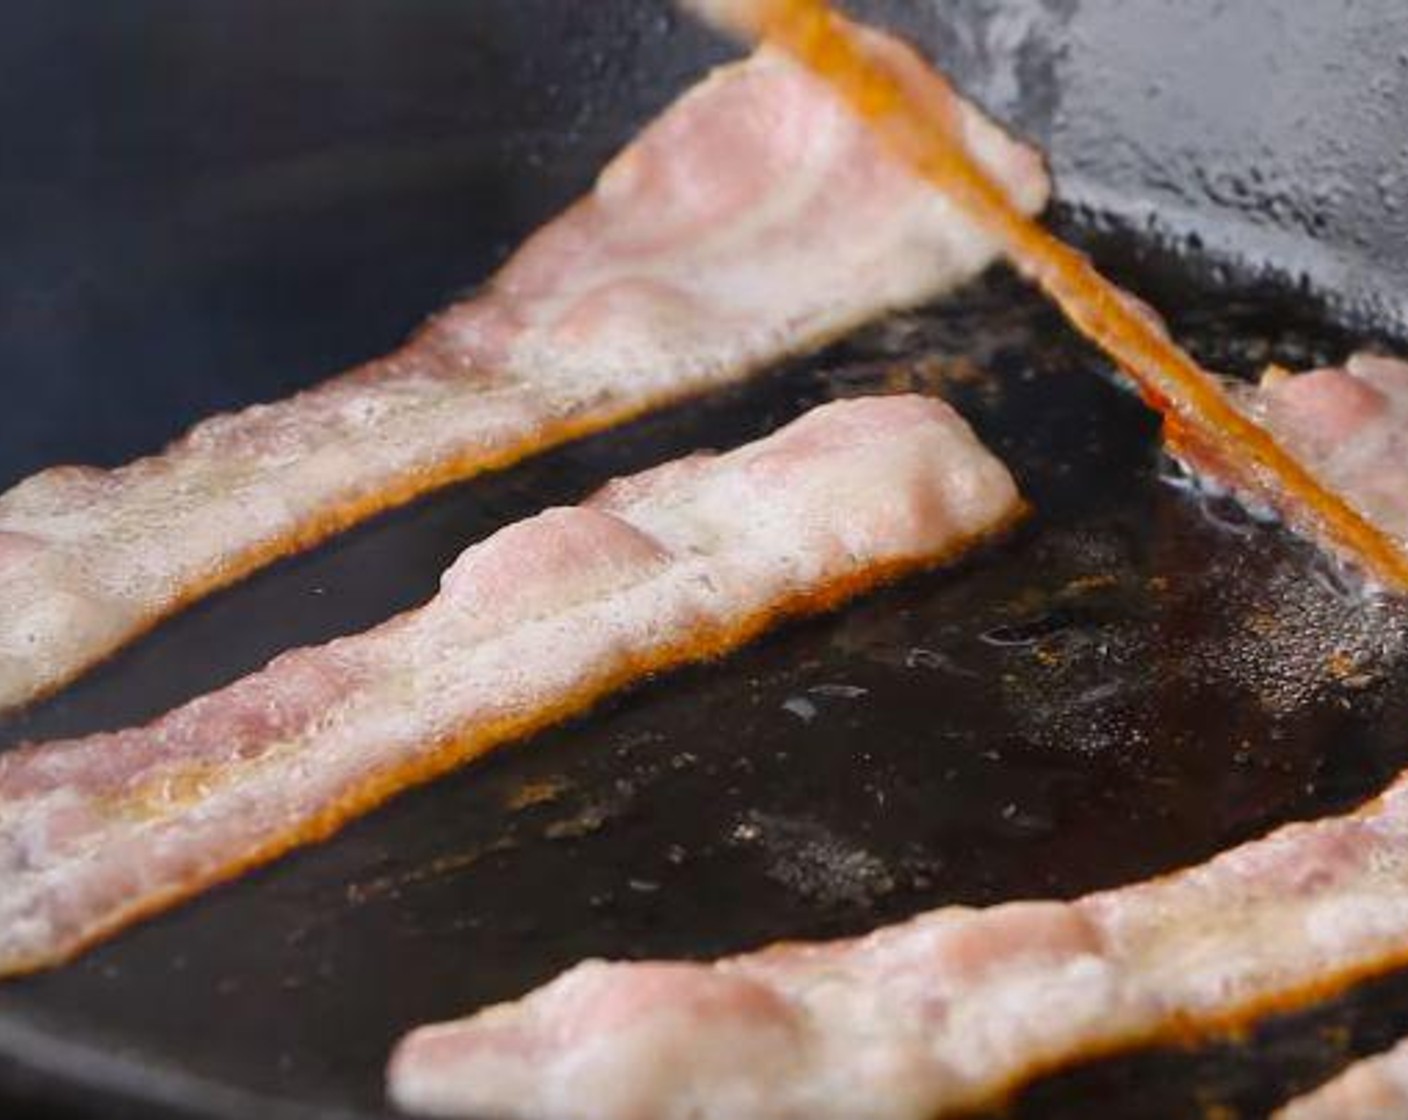 step 1 Fry the Bacon (5 slices) over medium heat, about 8-10 minutes. Drain the excess grease on a paper towel. Chop the bacon.